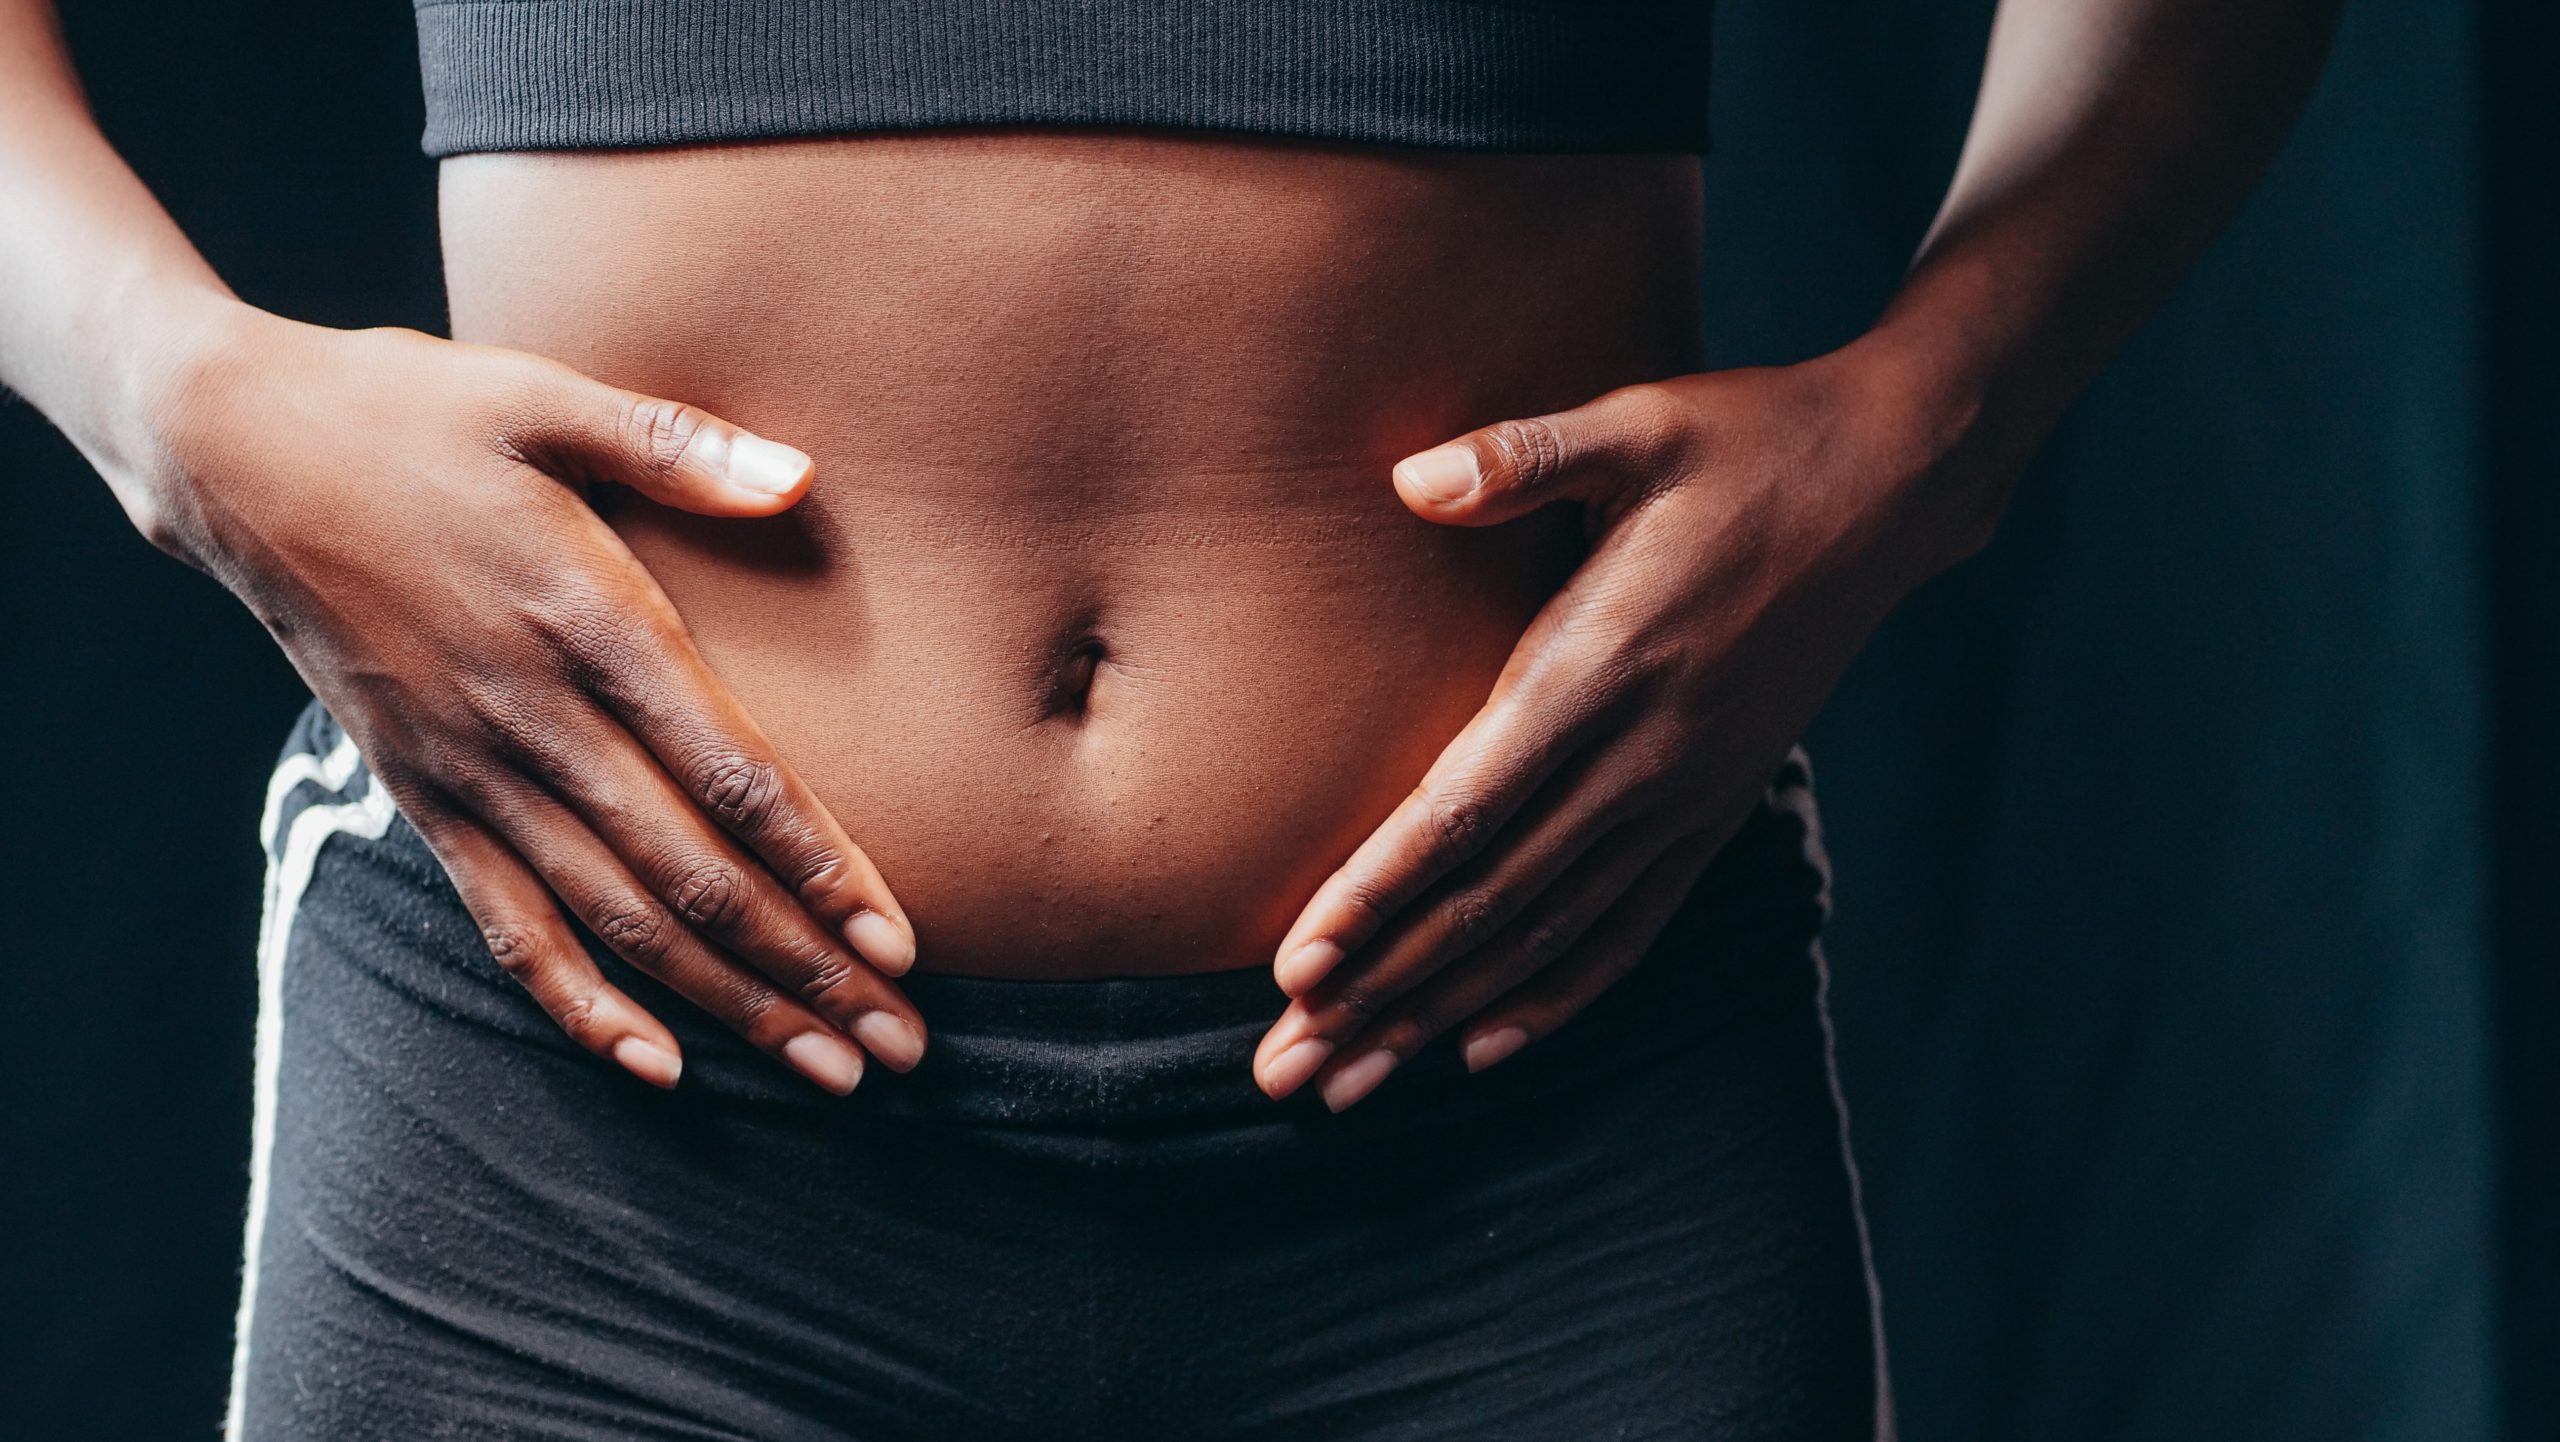 What are the Medical Benefits of Getting a Tummy Tuck?